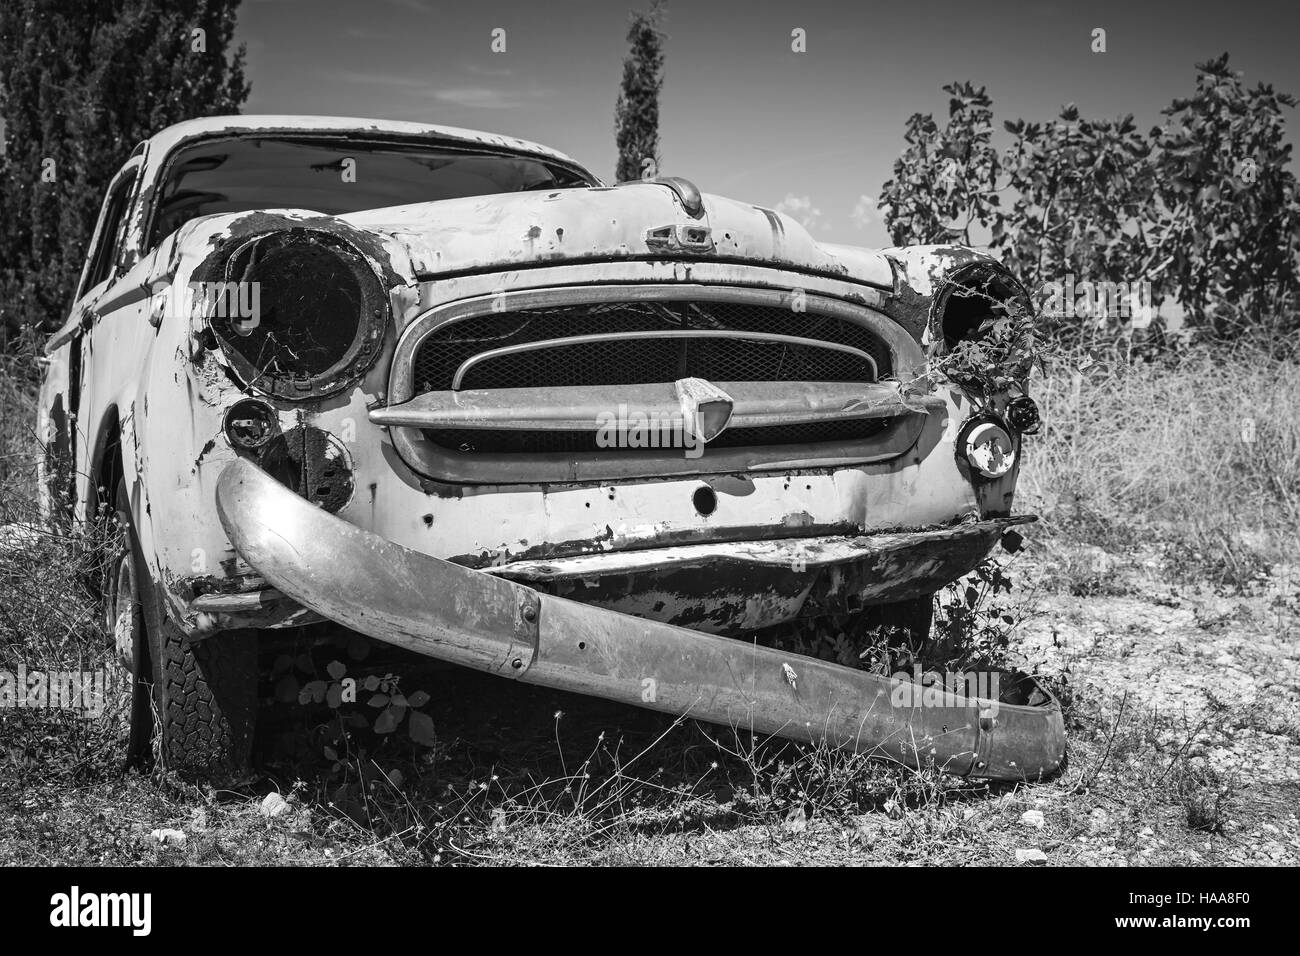 Zakynthos, Greece - August 20, 2016: Old abandoned rusted car stands in summer garden, closeup monochrome photo Stock Photo